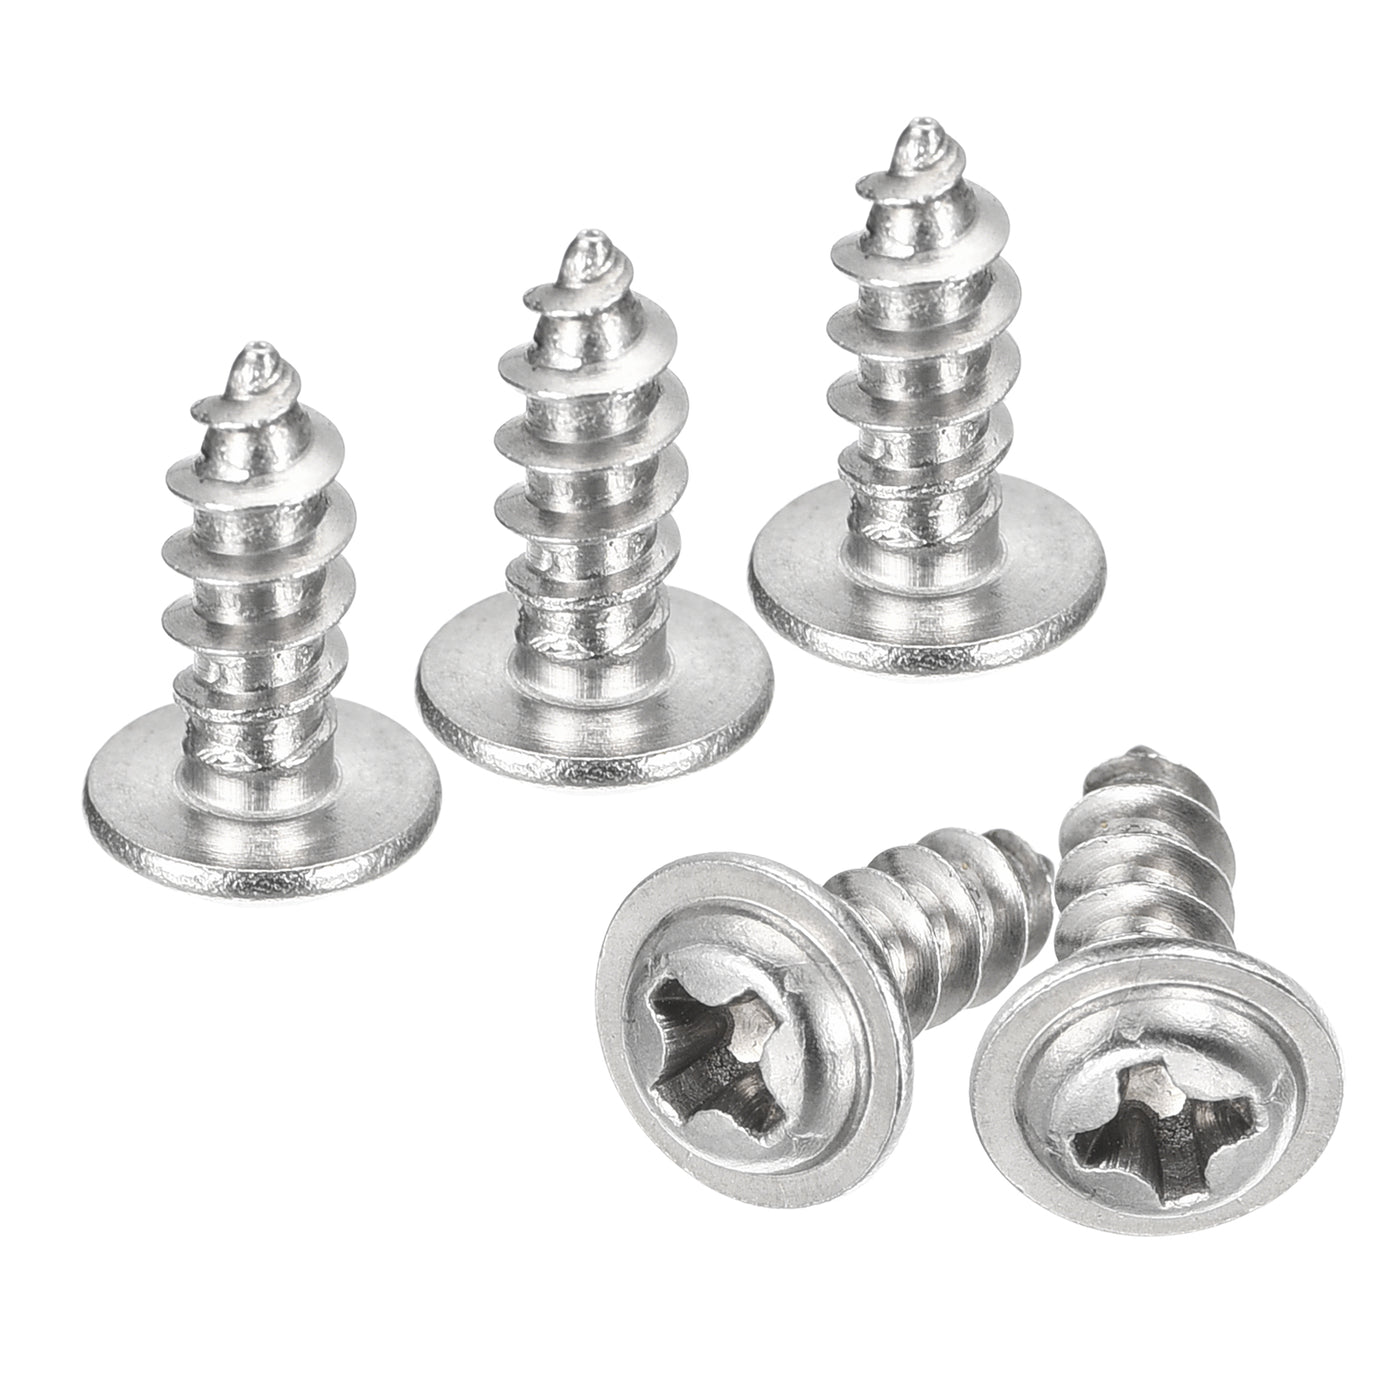 uxcell Uxcell ST4x10mm Phillips Pan Head Self-tapping Screw with Washer, 100pcs - 304 Stainless Steel Wood Screw Full Thread (Silver)